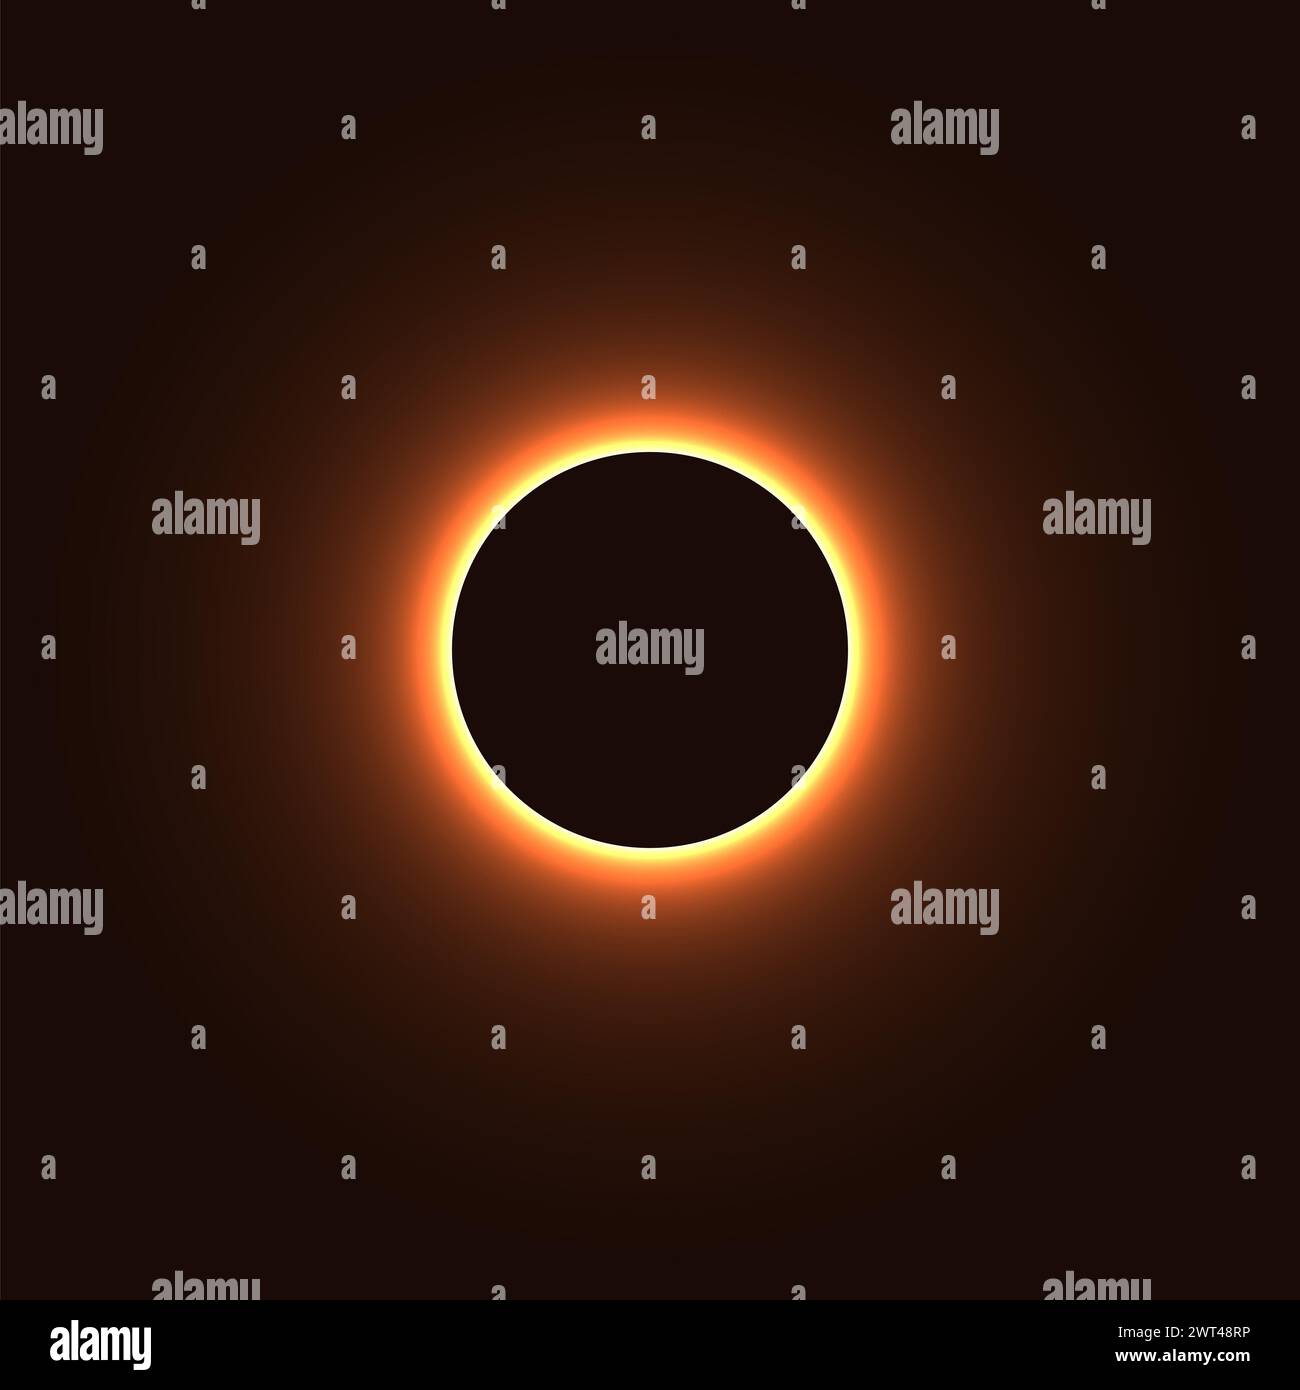 Total solar eclipse. Illustration of a natural phenomenon, where the Moon obscures the Sun. Eclipses have been interpreted as omens, and portents. Stock Photo